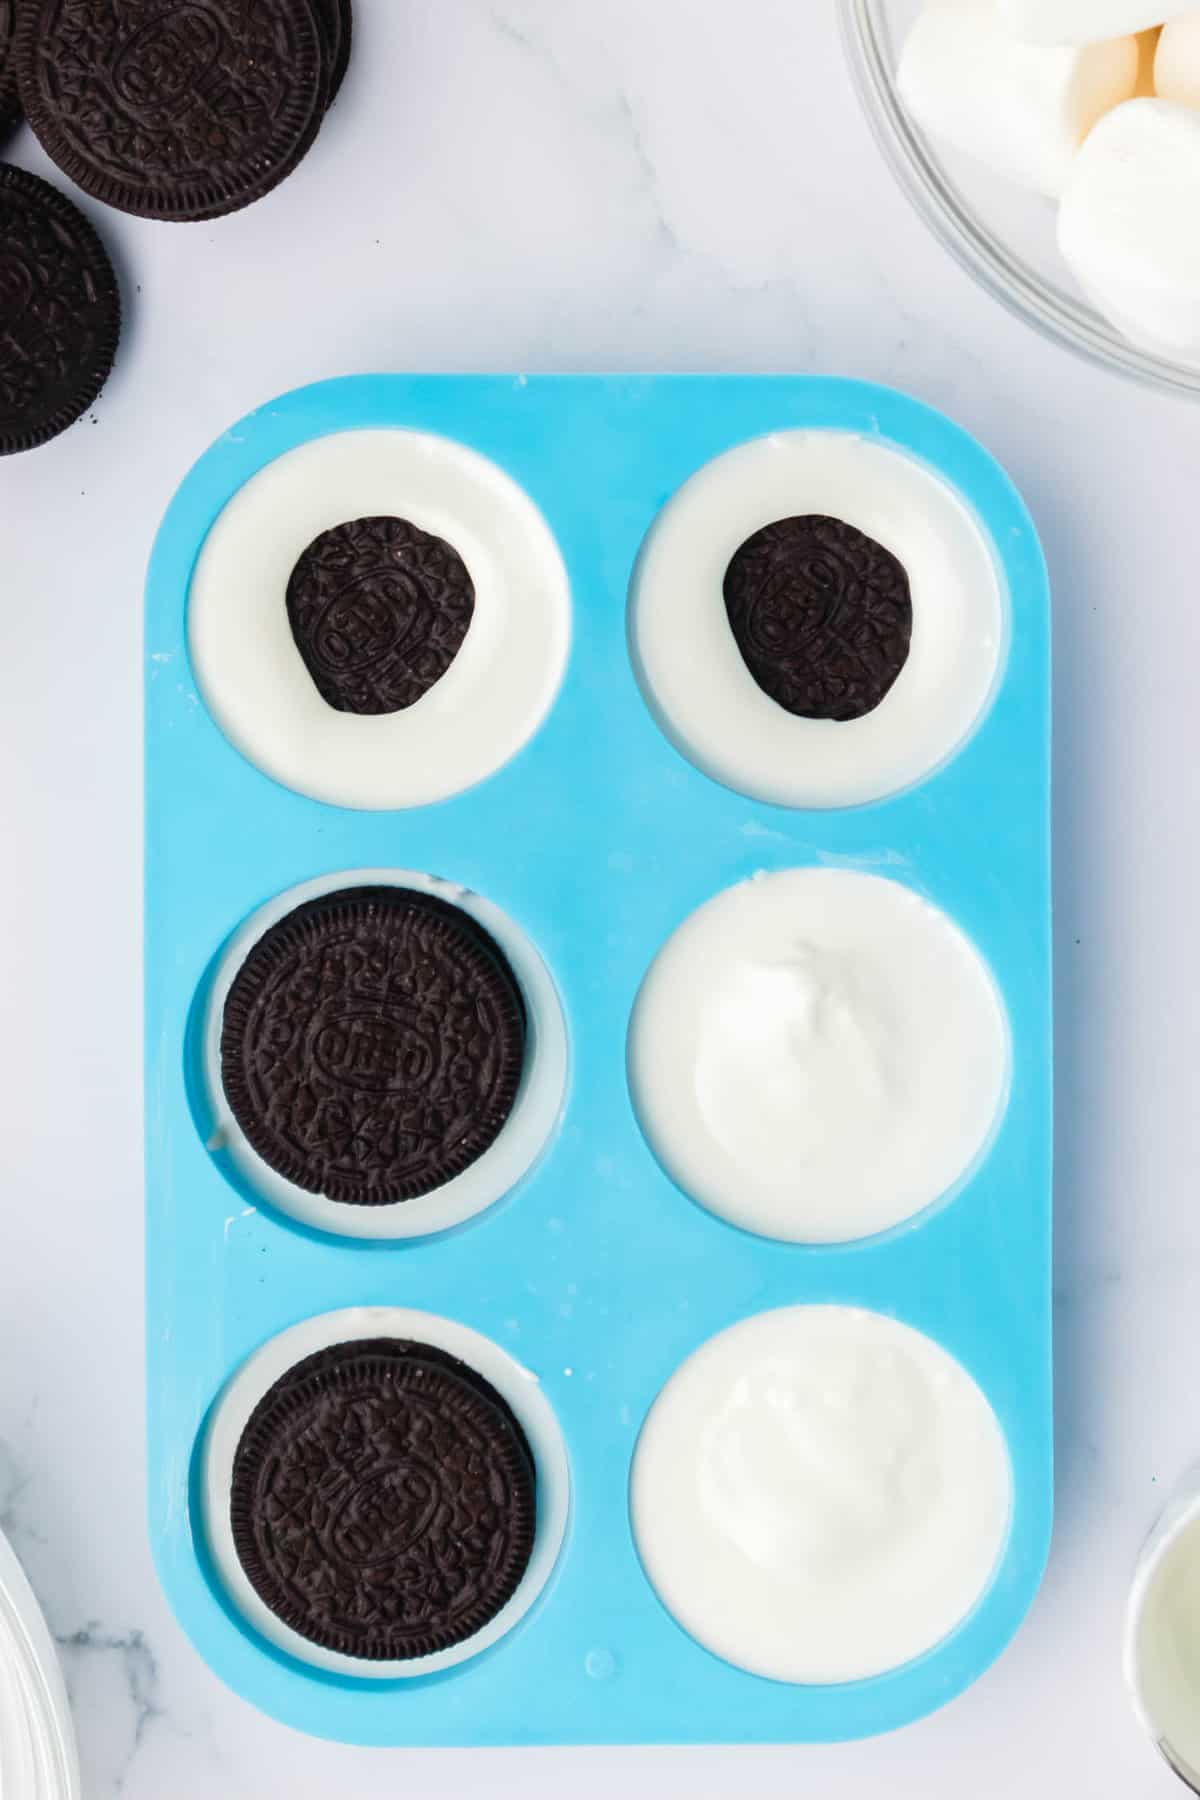 Place the Silicone Cookie Mold on a Flat Surface and fill 1/4 full of melted Chocolate. Place an Oreo in the Chocolate and Cover Completely. Use a Spoon if needed.